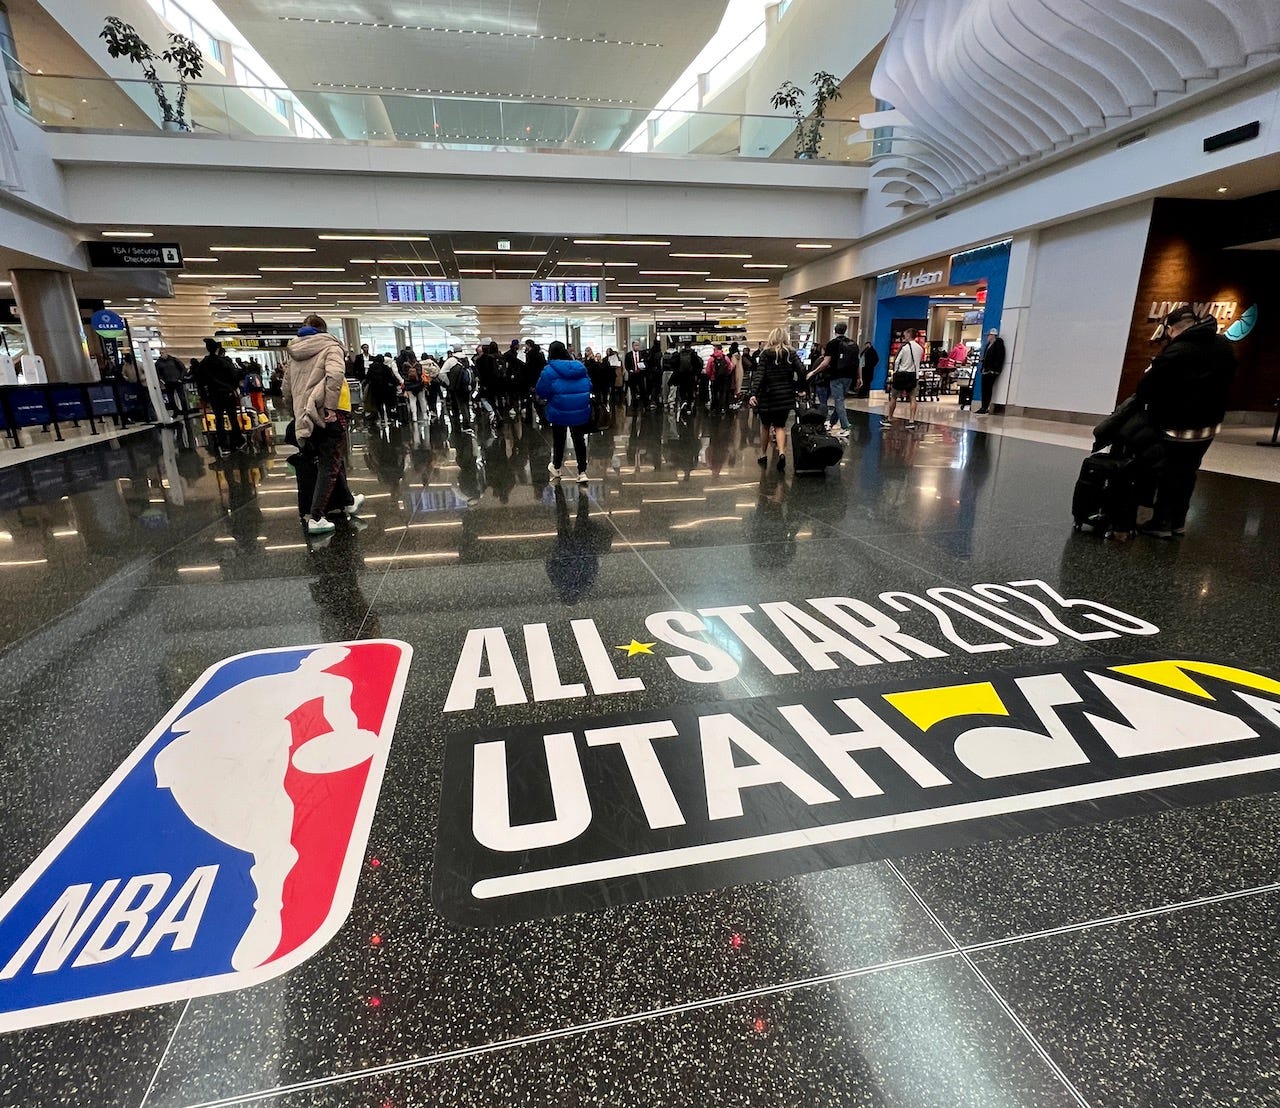 There were many graphics inside the airport welcoming everyone to SLC.